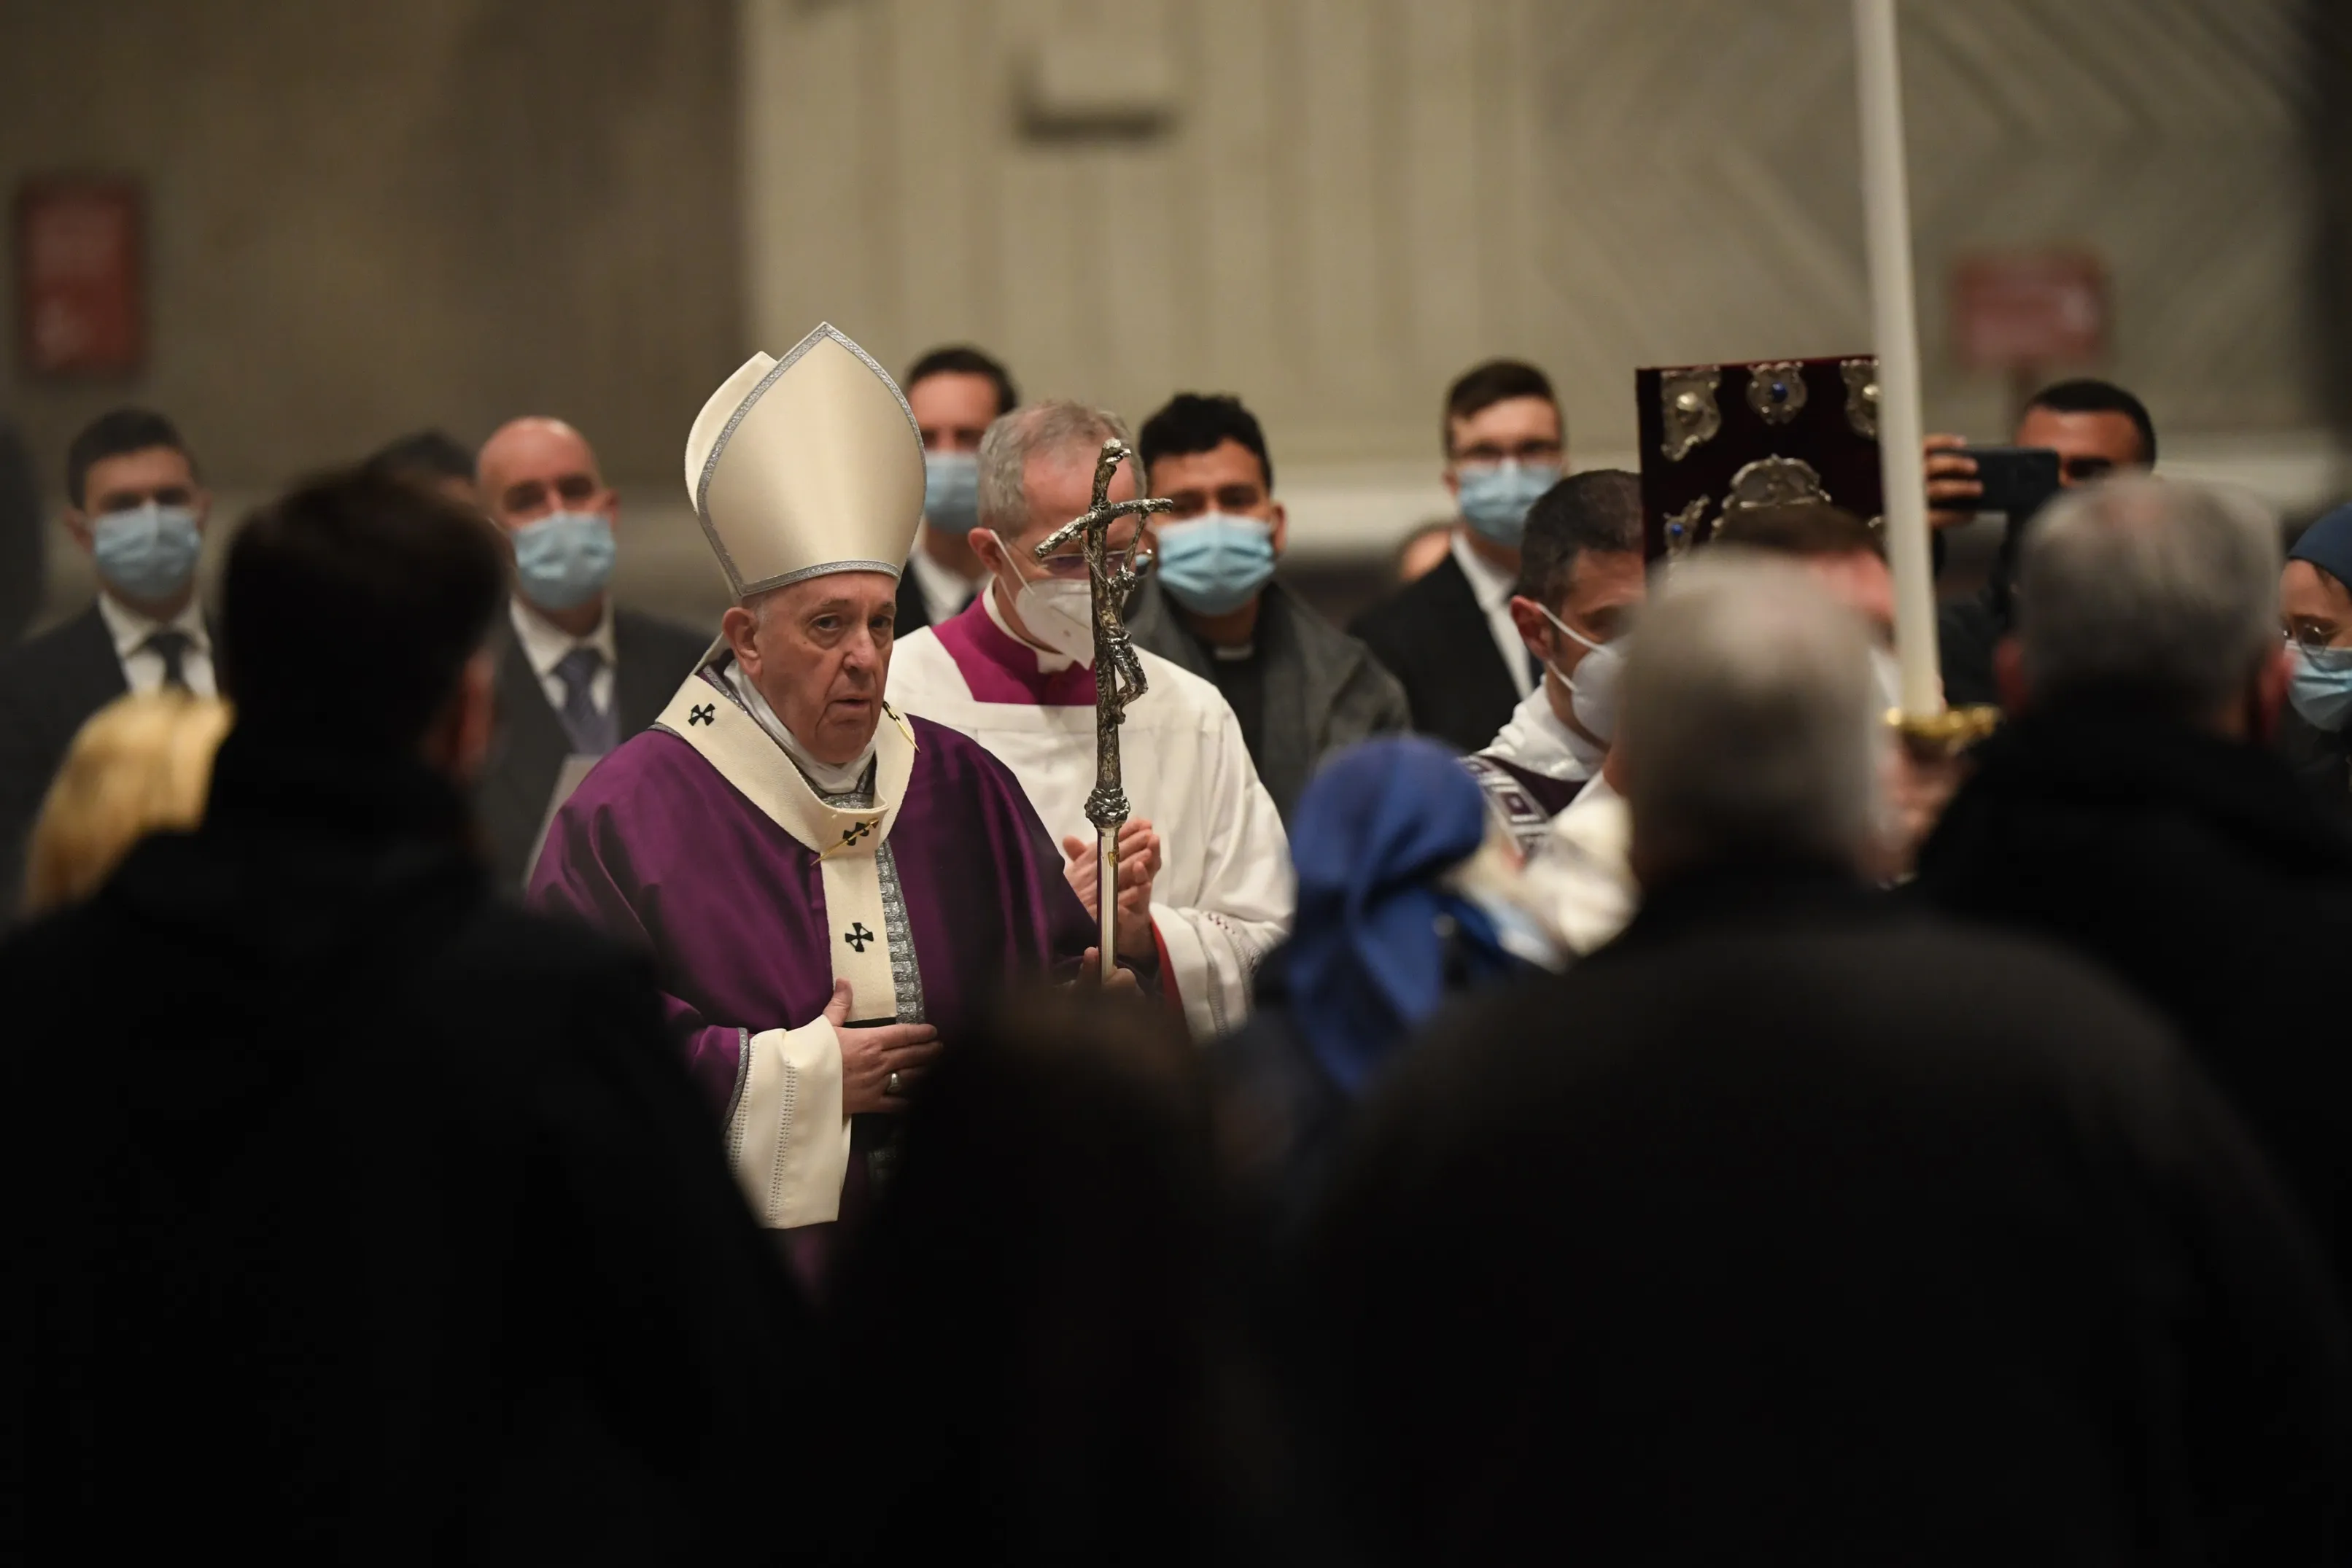 Bishop-elect Guido Marini walks beside Pope Francis on Ash Wednesday 2021 in St. Peter's Basilica?w=200&h=150